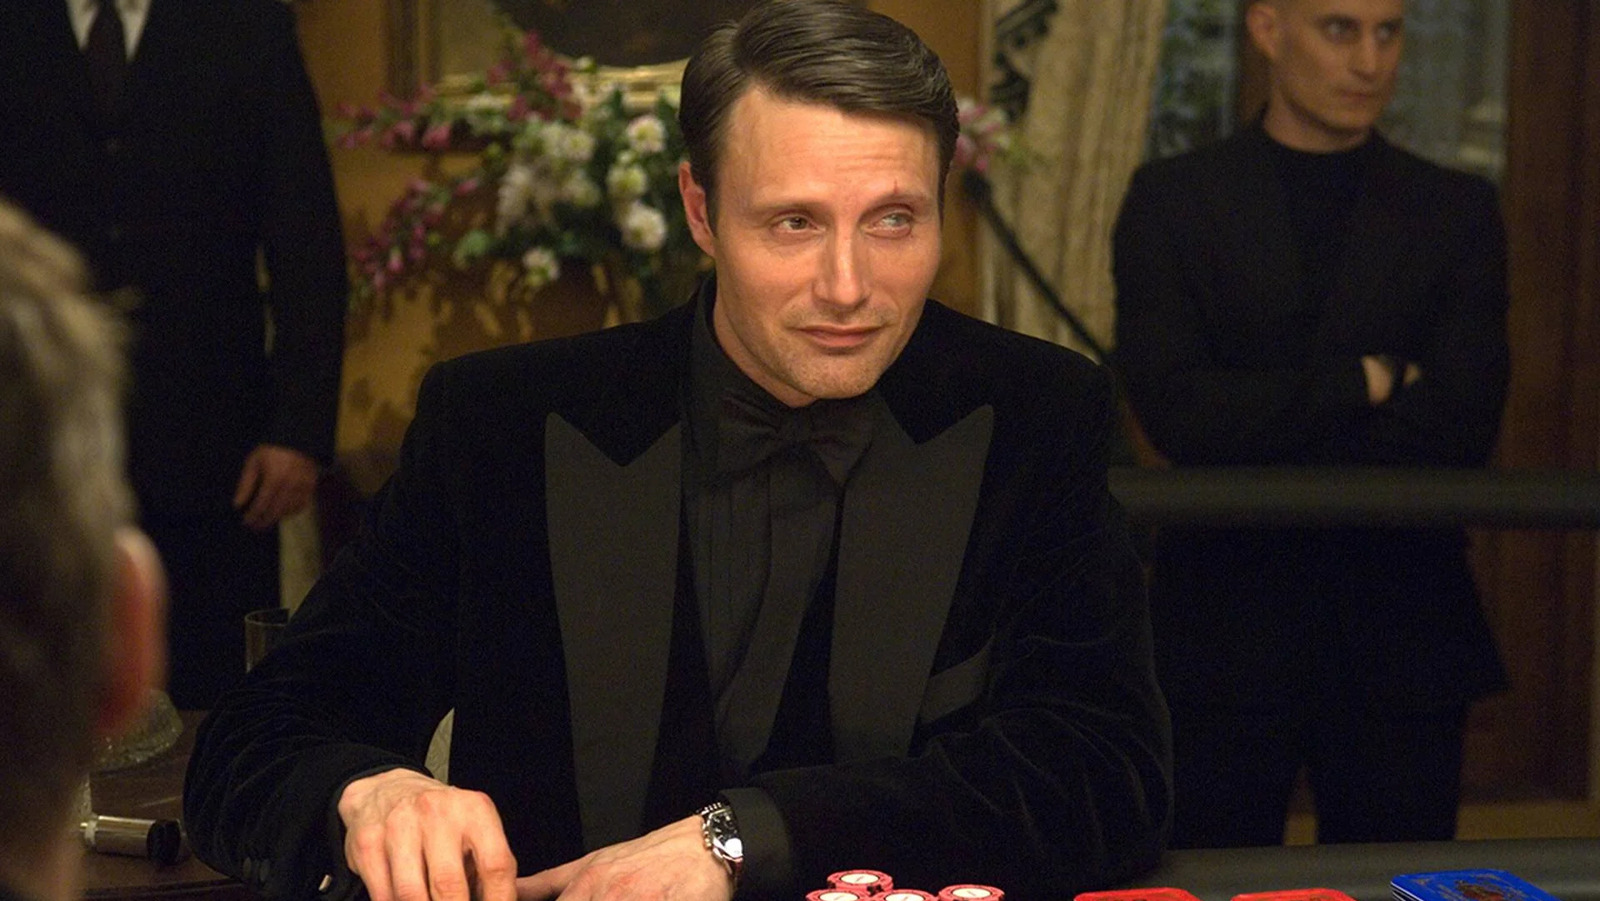 The casting of Mads Mikkelsen's Casino Royale took place on location